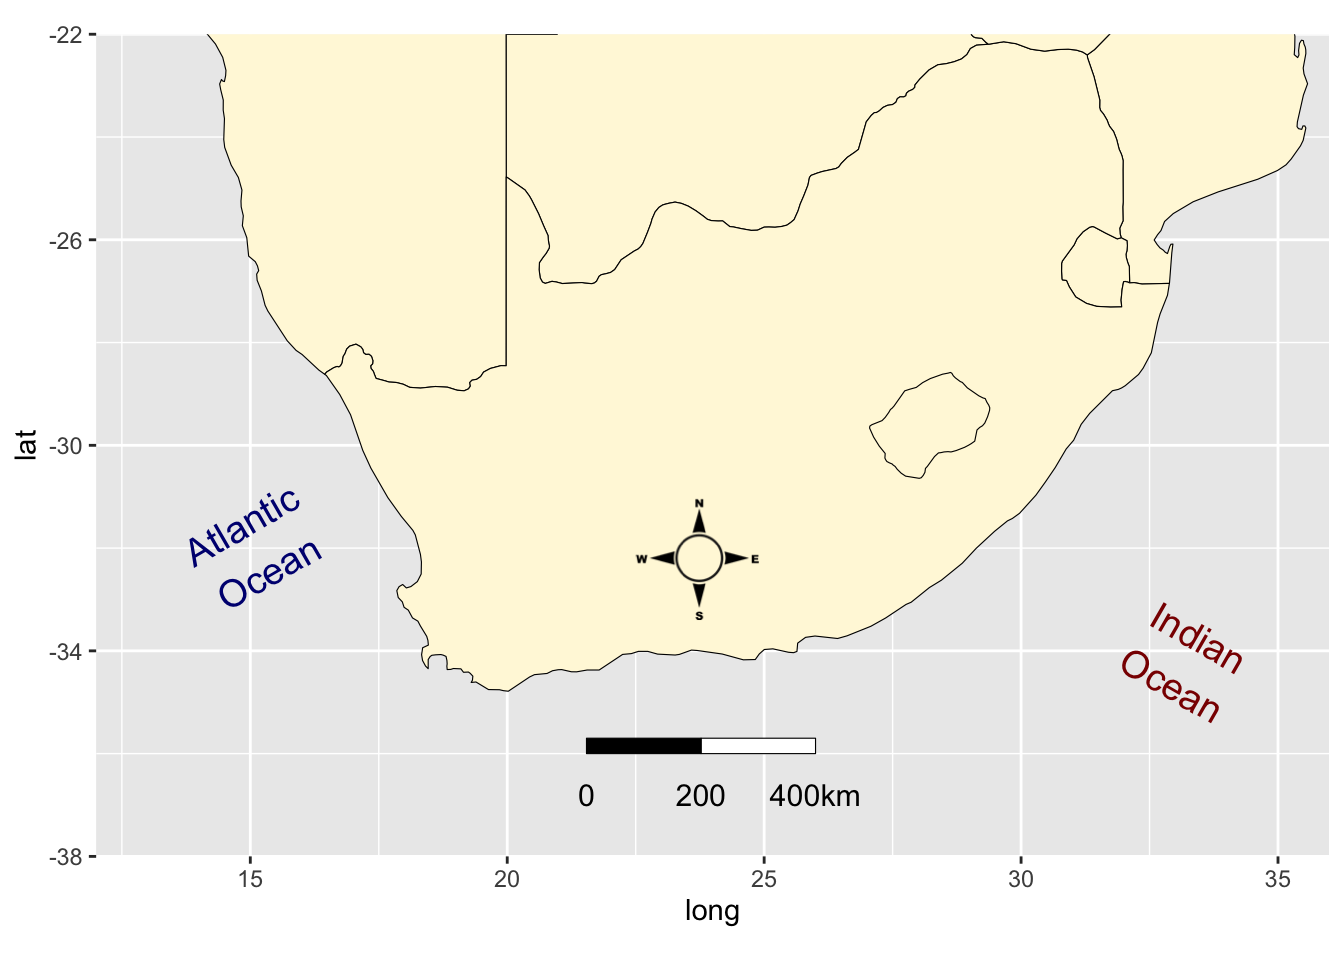 Map of southern Africa with labels and a scale bar.